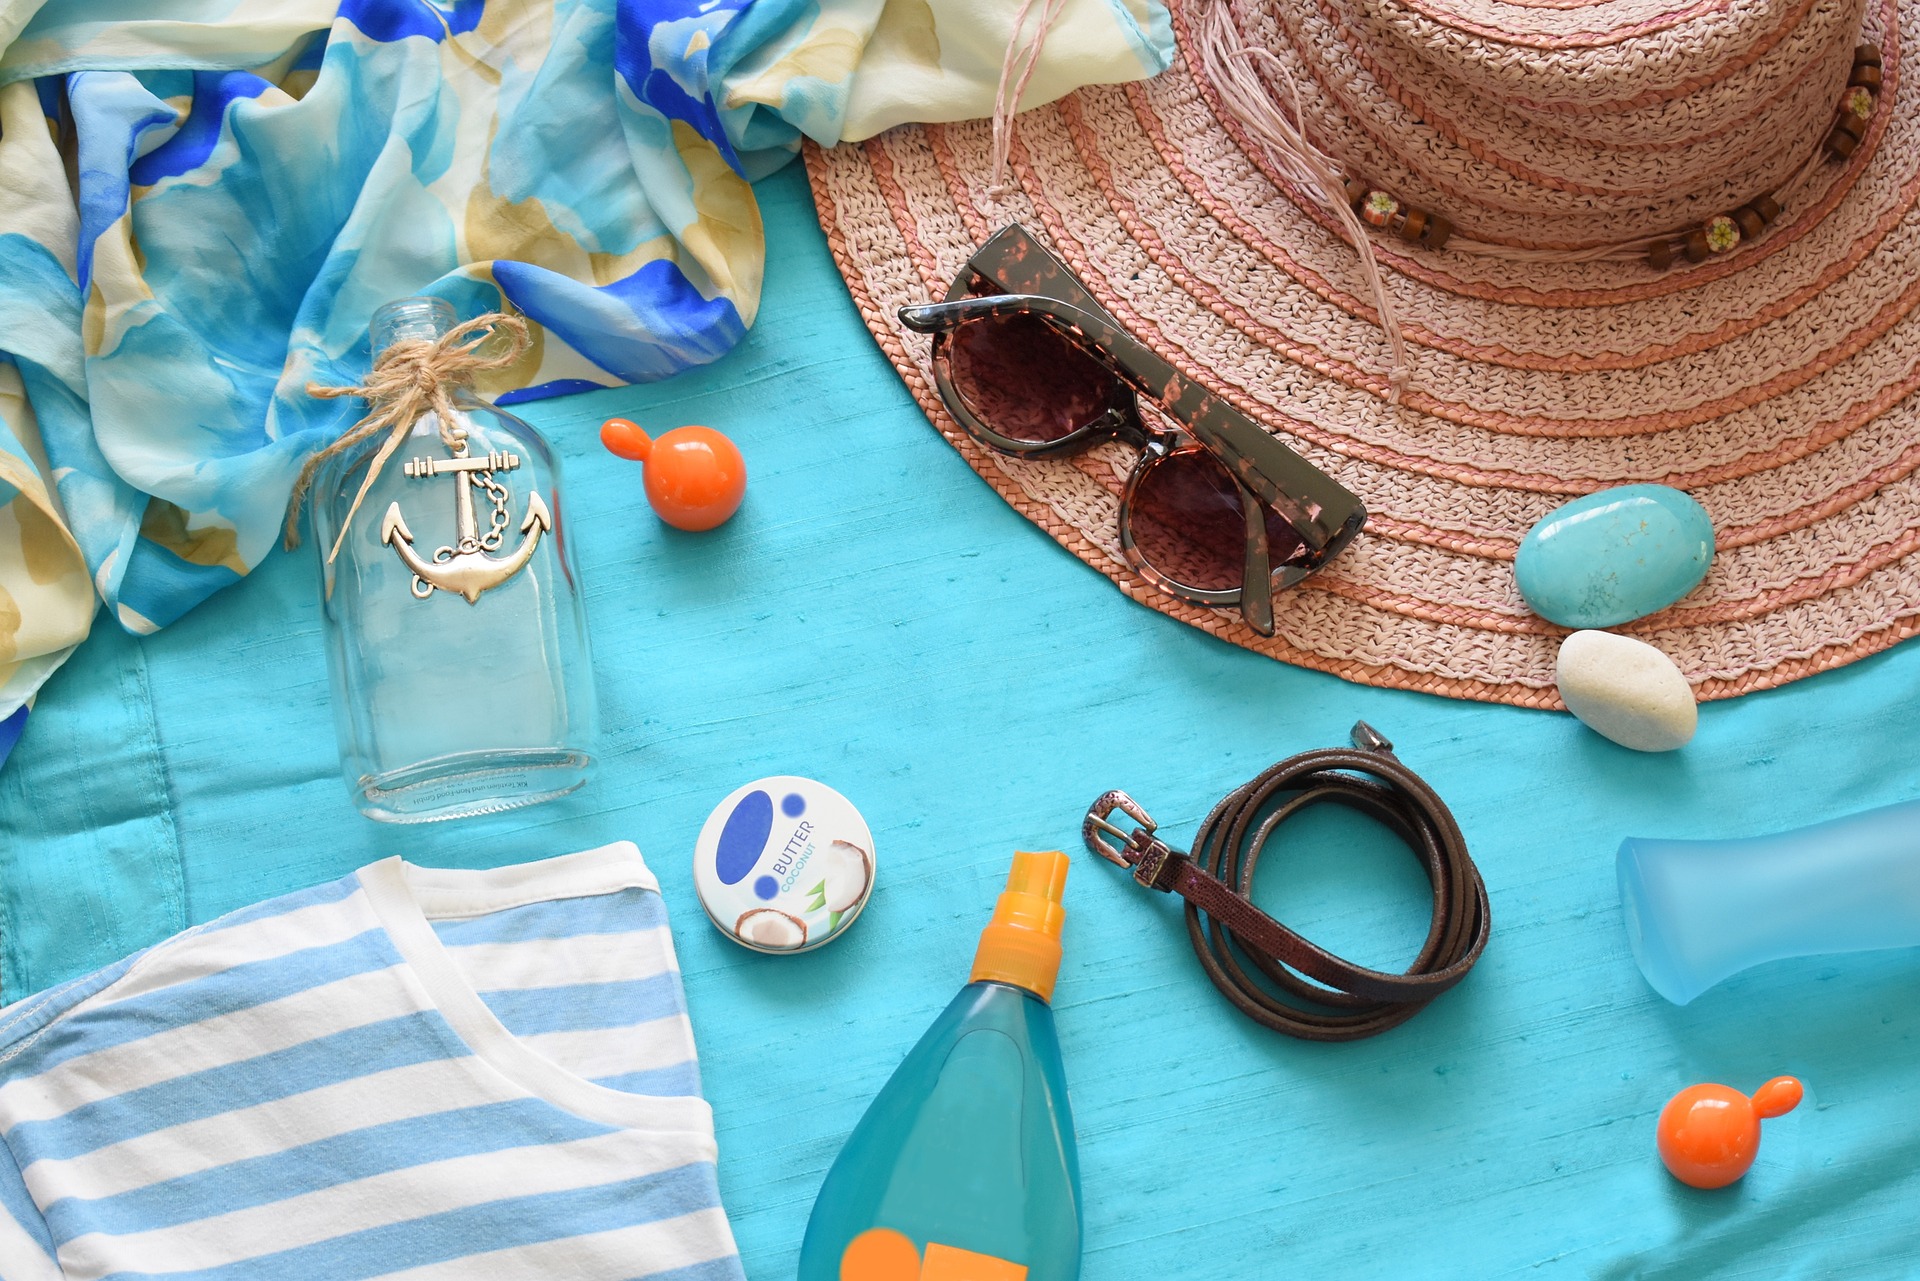 What to pack for your yacht holiday?